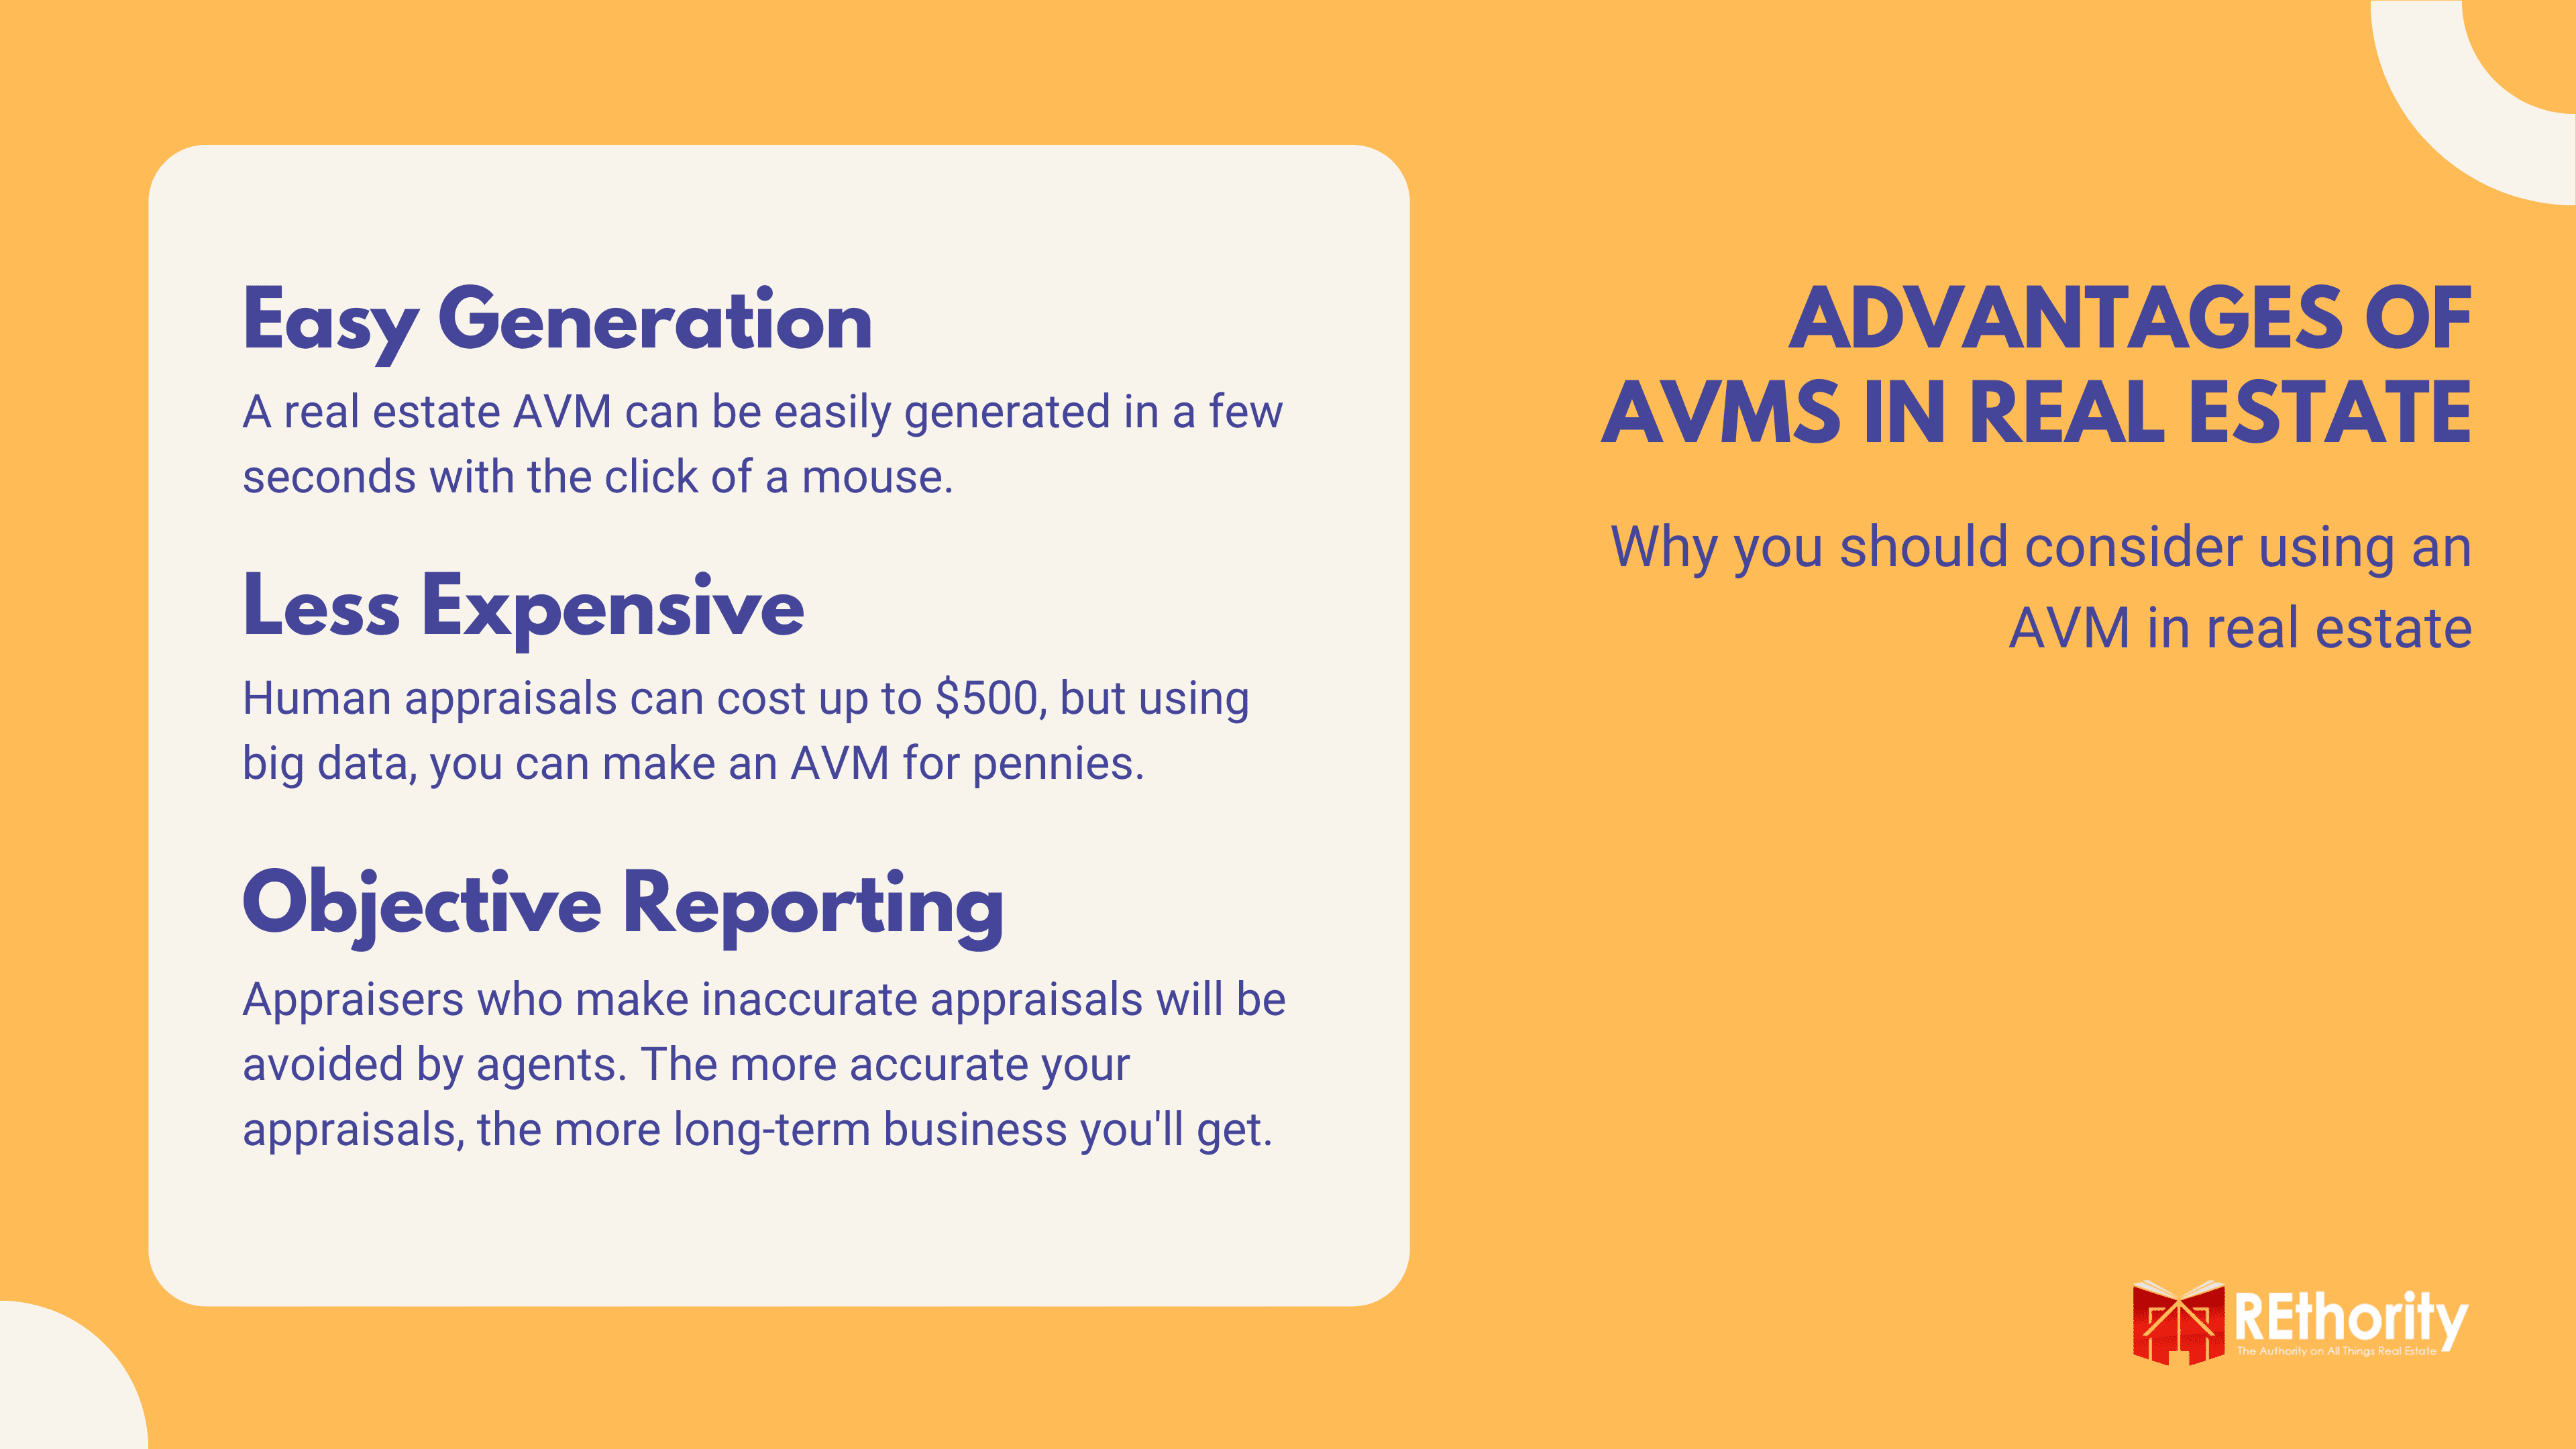 Advantages of AVMs in real estate